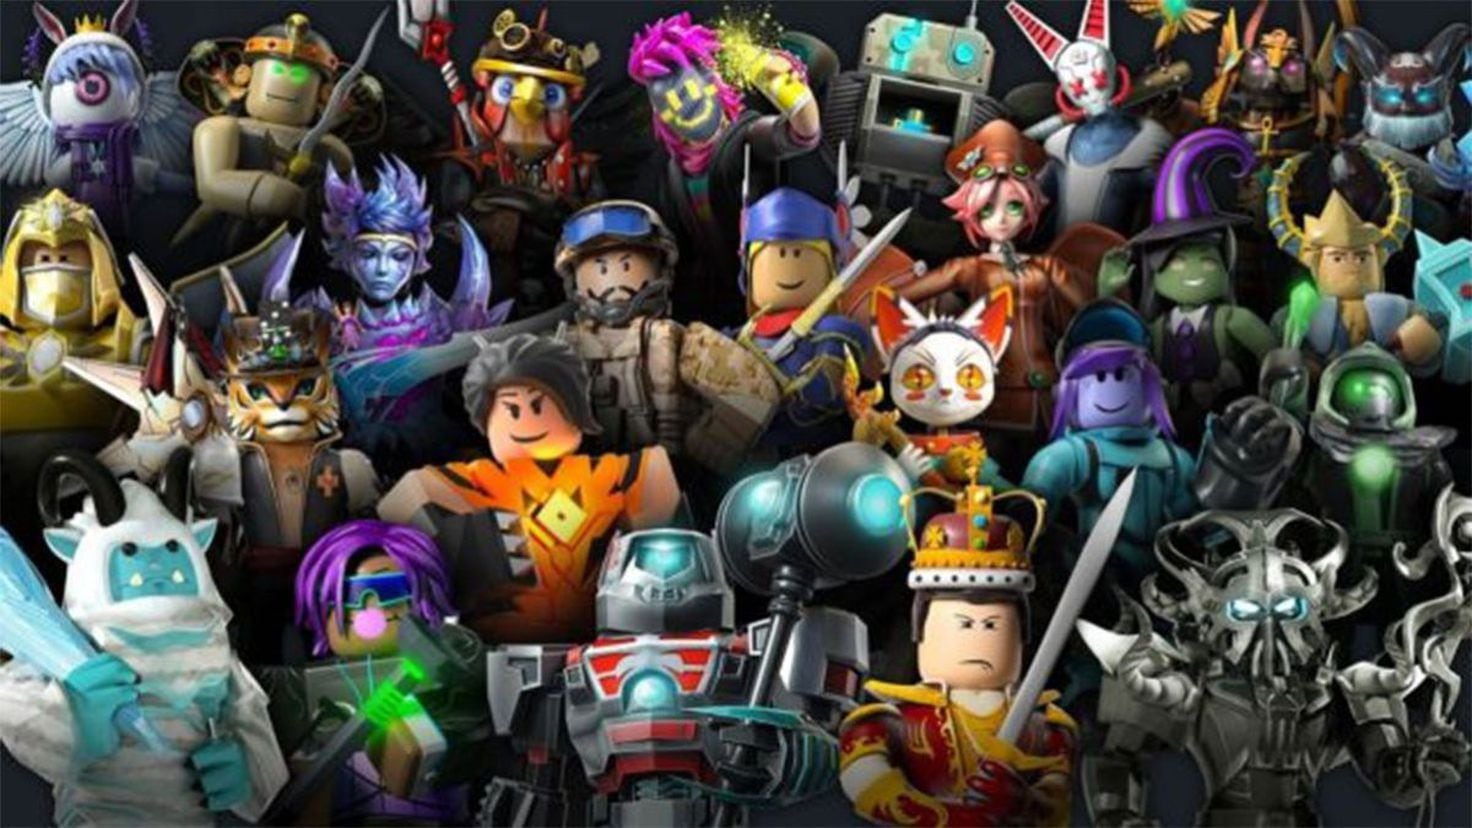 ALL New Roblox Promo Codes on ROBLOX 2021!